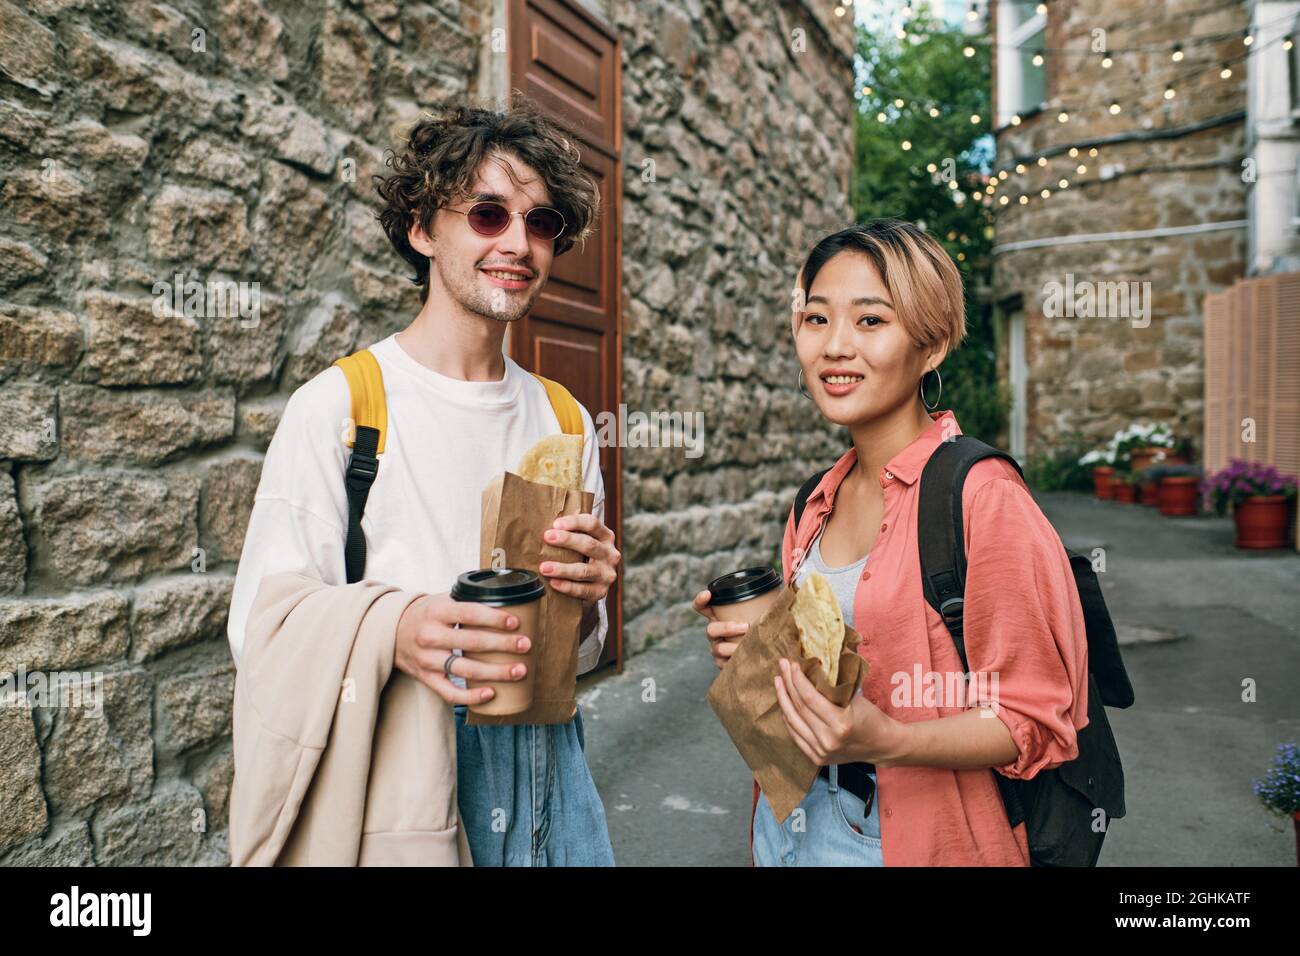 Happy young intercultural couple having fastfood with drinks in urban environment Stock Photo